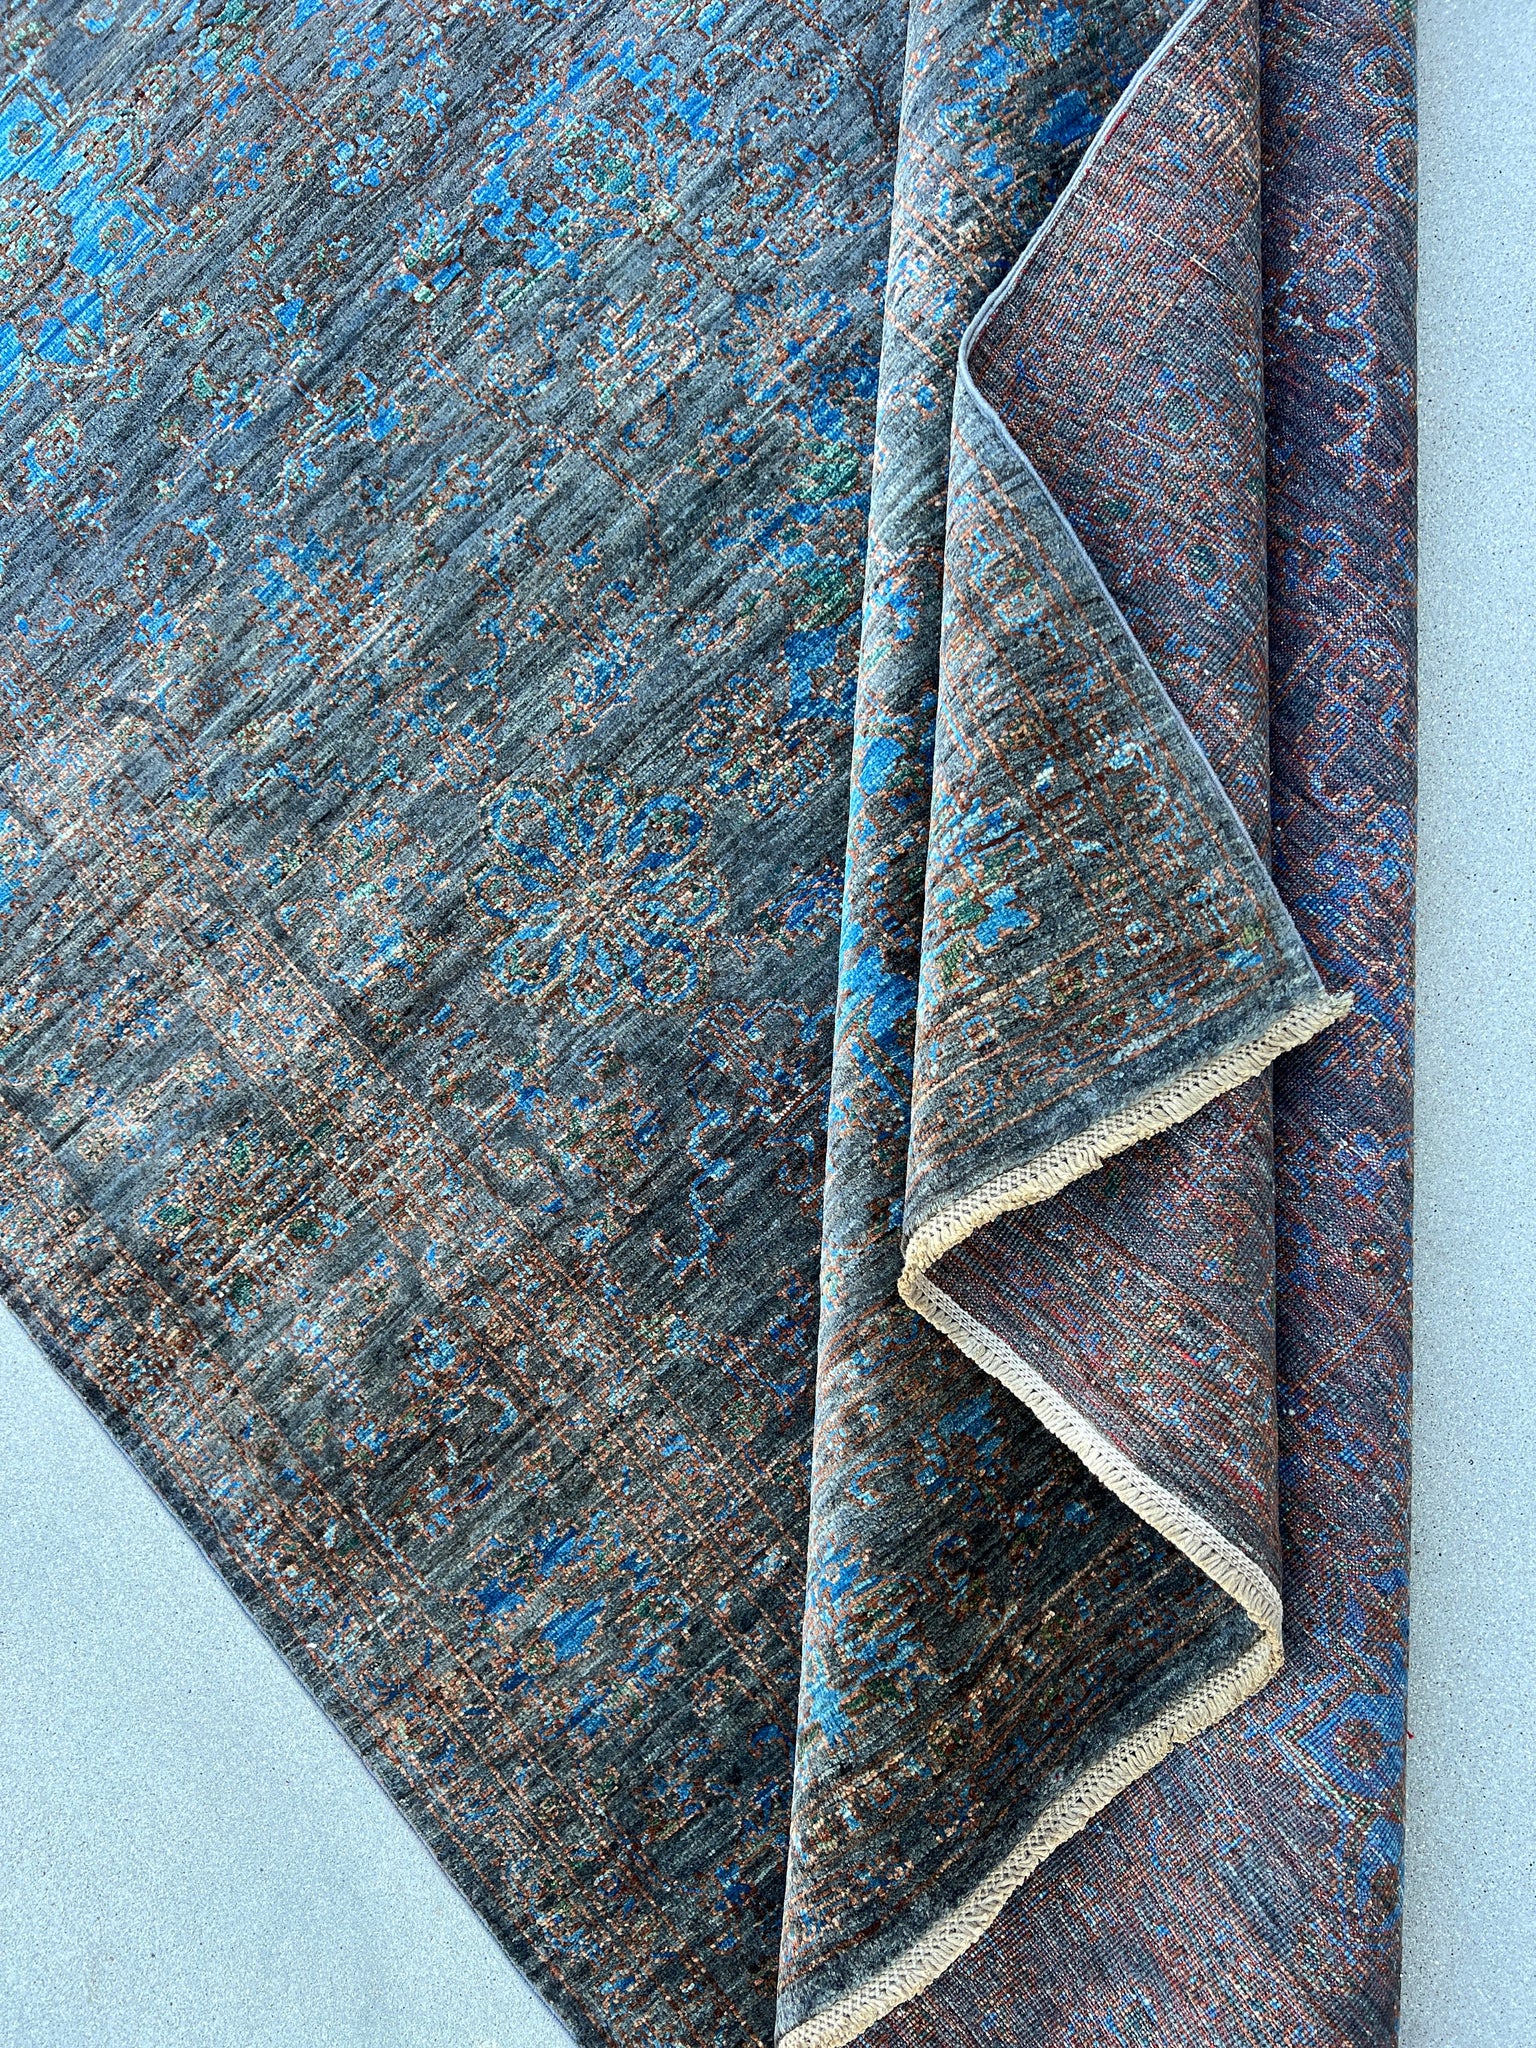 6x8 (180x245) Hand Knotted Afghan Rug | Charcoal Grey Sapphire Blue Chocolate Brown Rust Copper Orange Turquoise | Floral Tribal Wool Boho